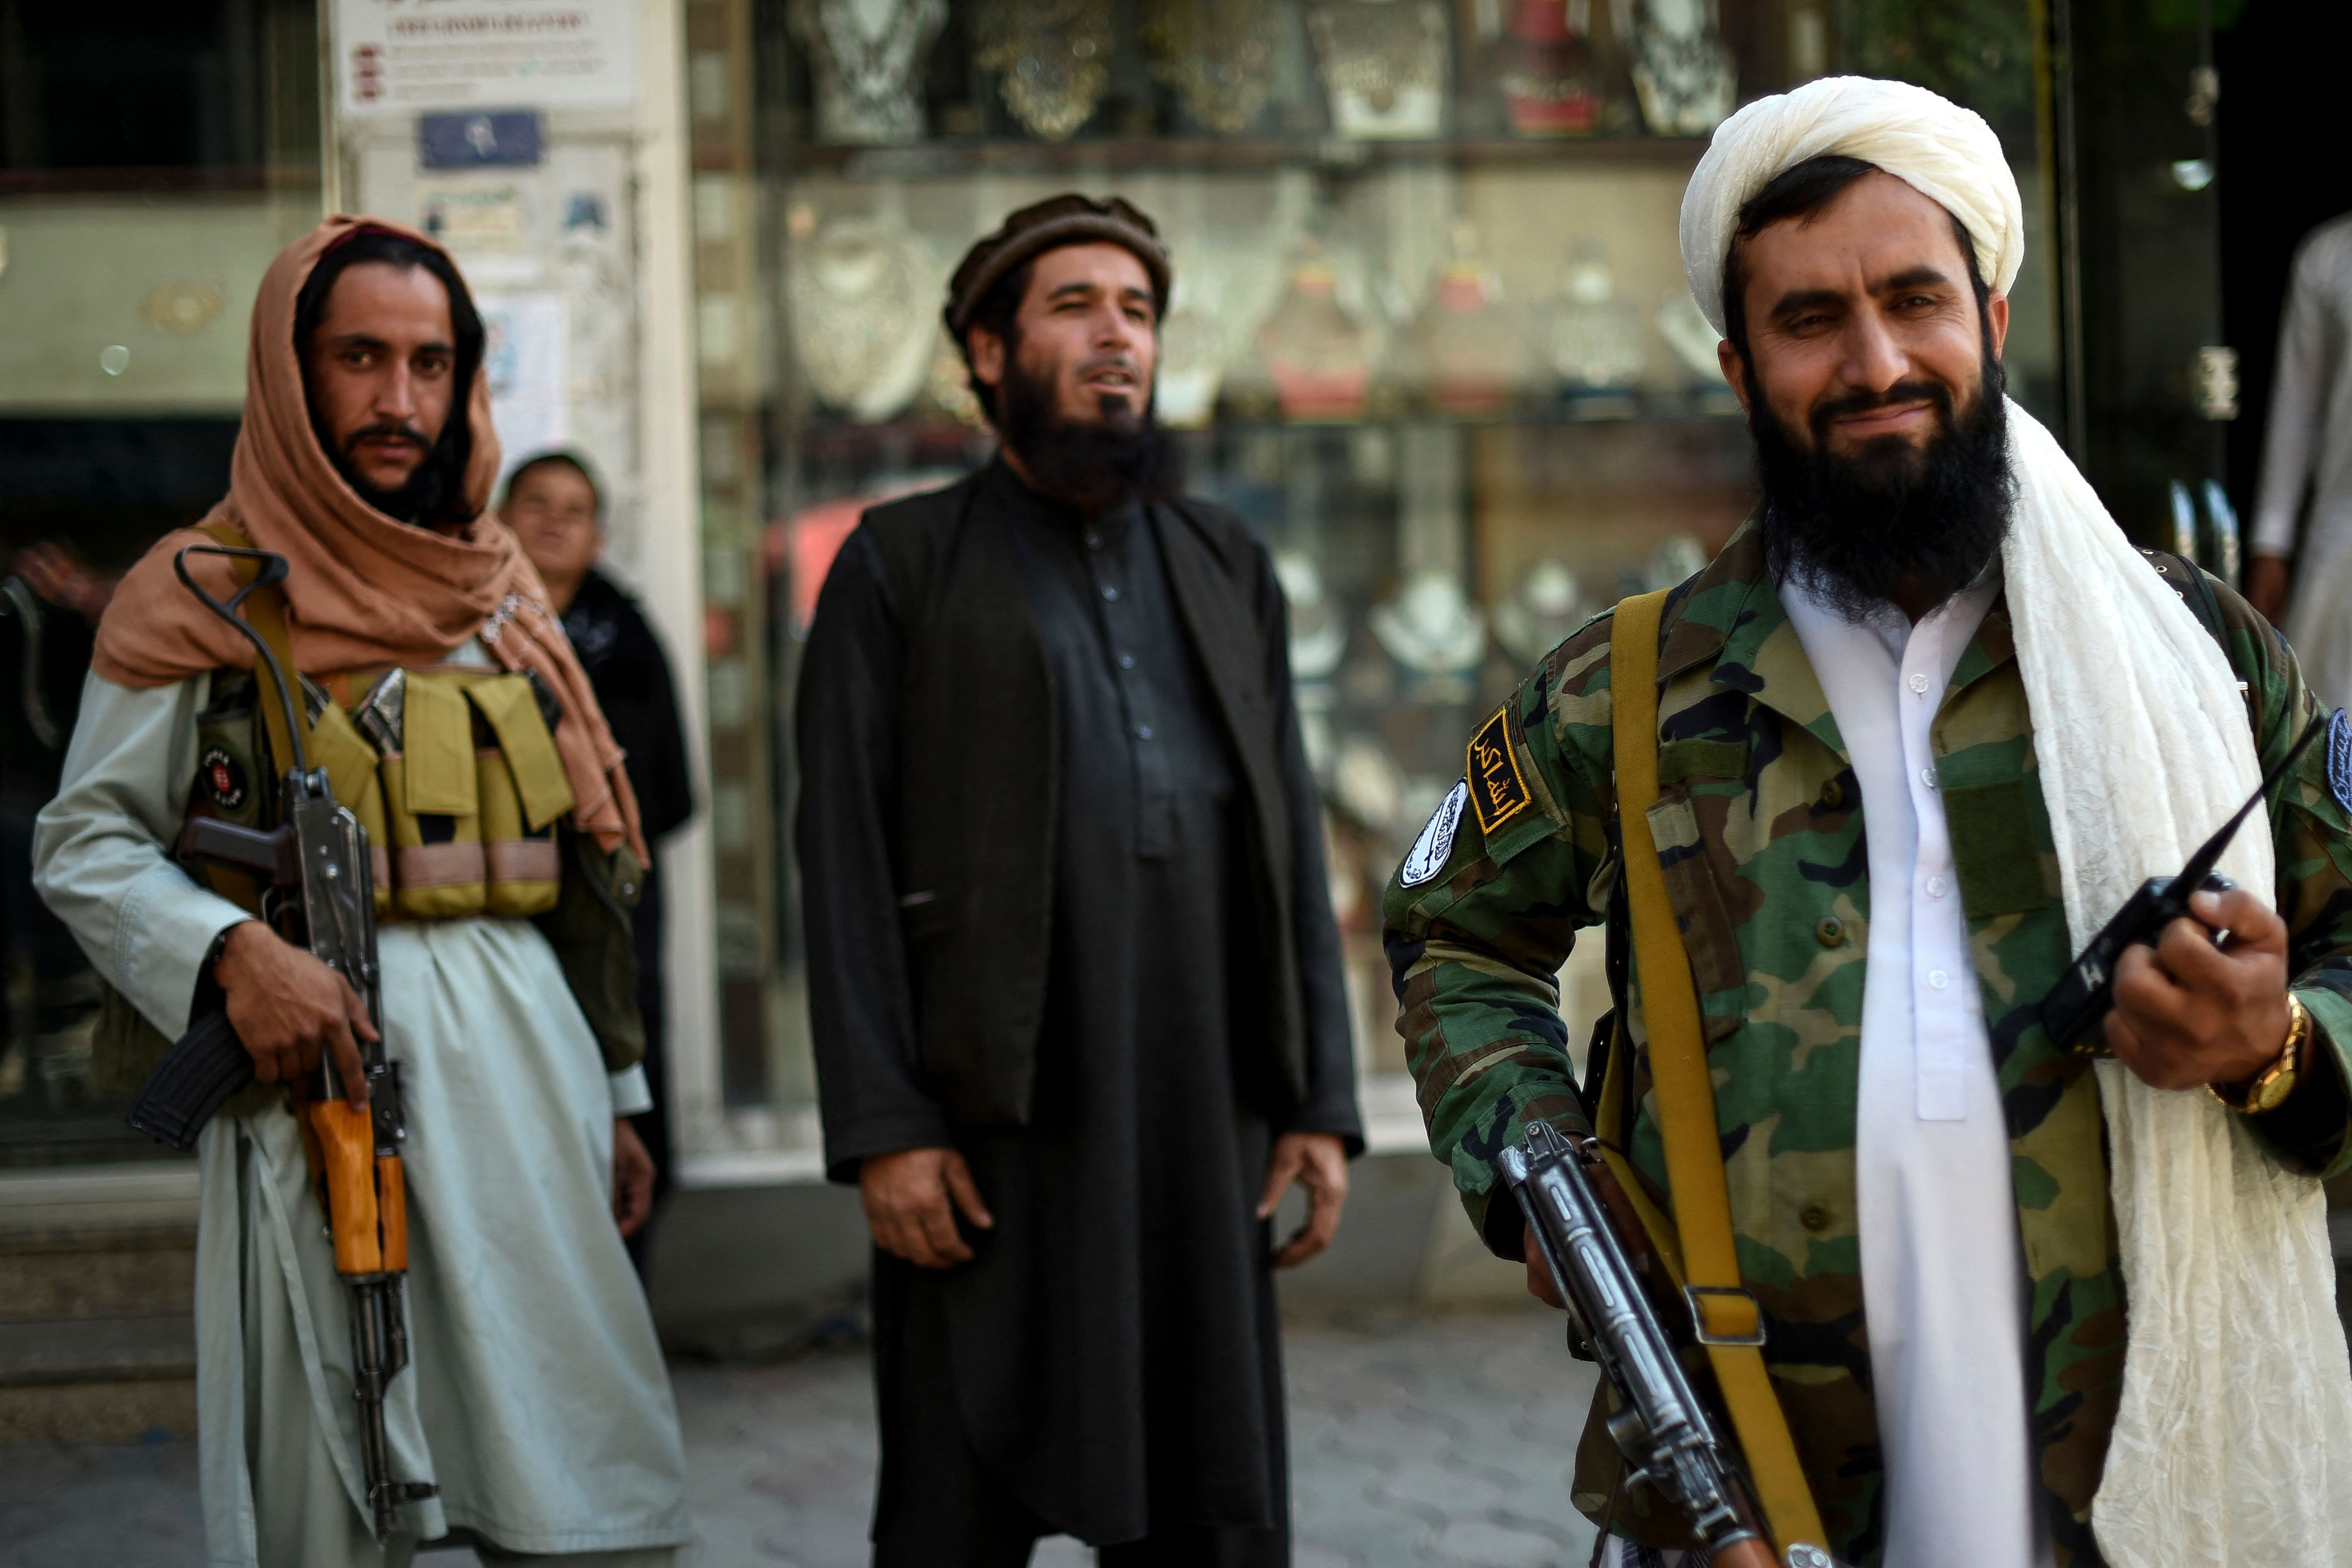 Taliban fighters stand guard on the backdrop of shops selling antiques and decorative merchandise at Chicken Street in Kabul on September 26, 2021.(Photo by WAKIL KOHSAR/AFP via Getty Images)